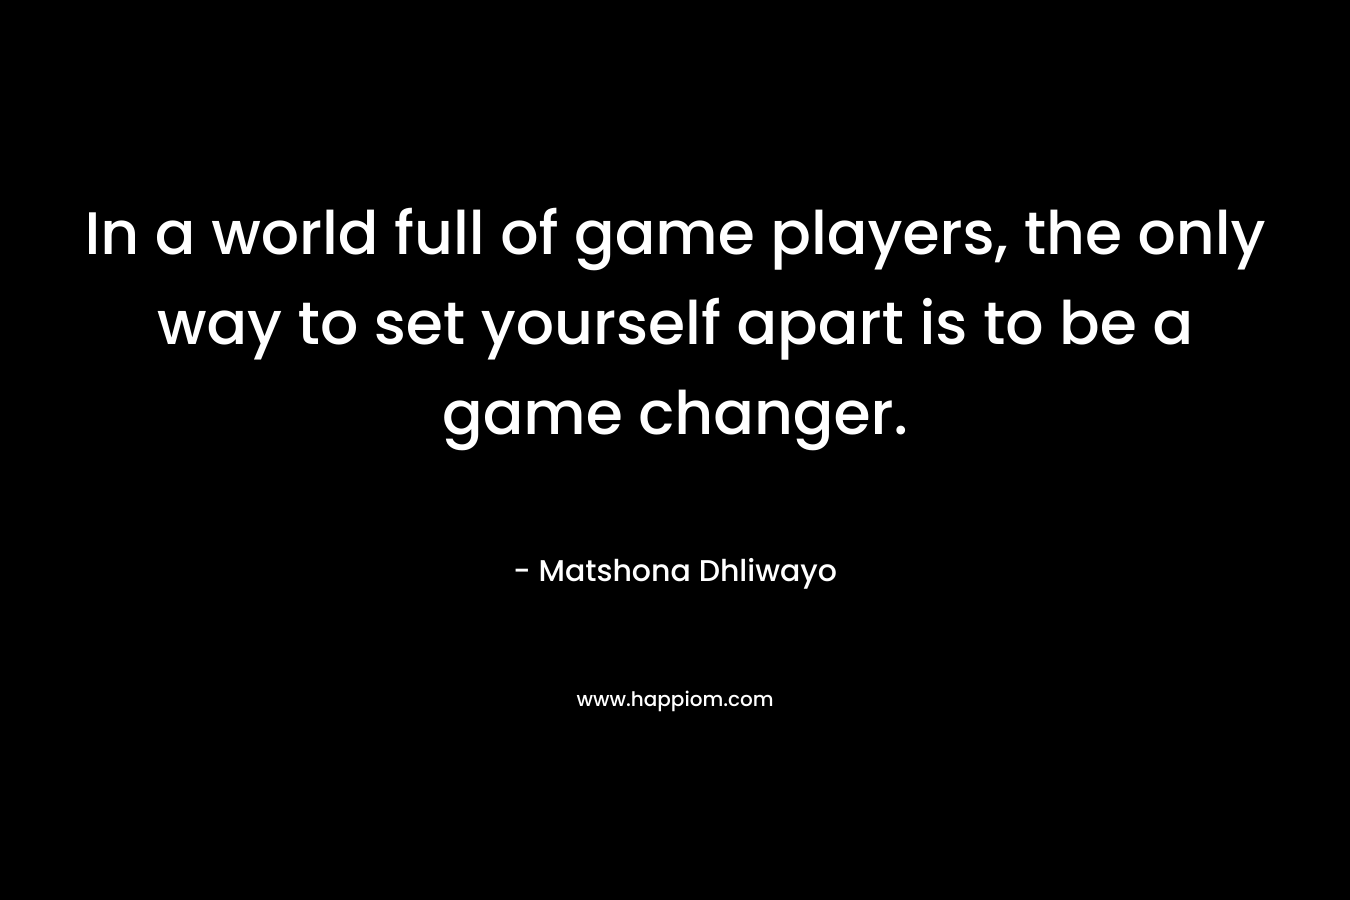 In a world full of game players, the only way to set yourself apart is to be a game changer. – Matshona Dhliwayo